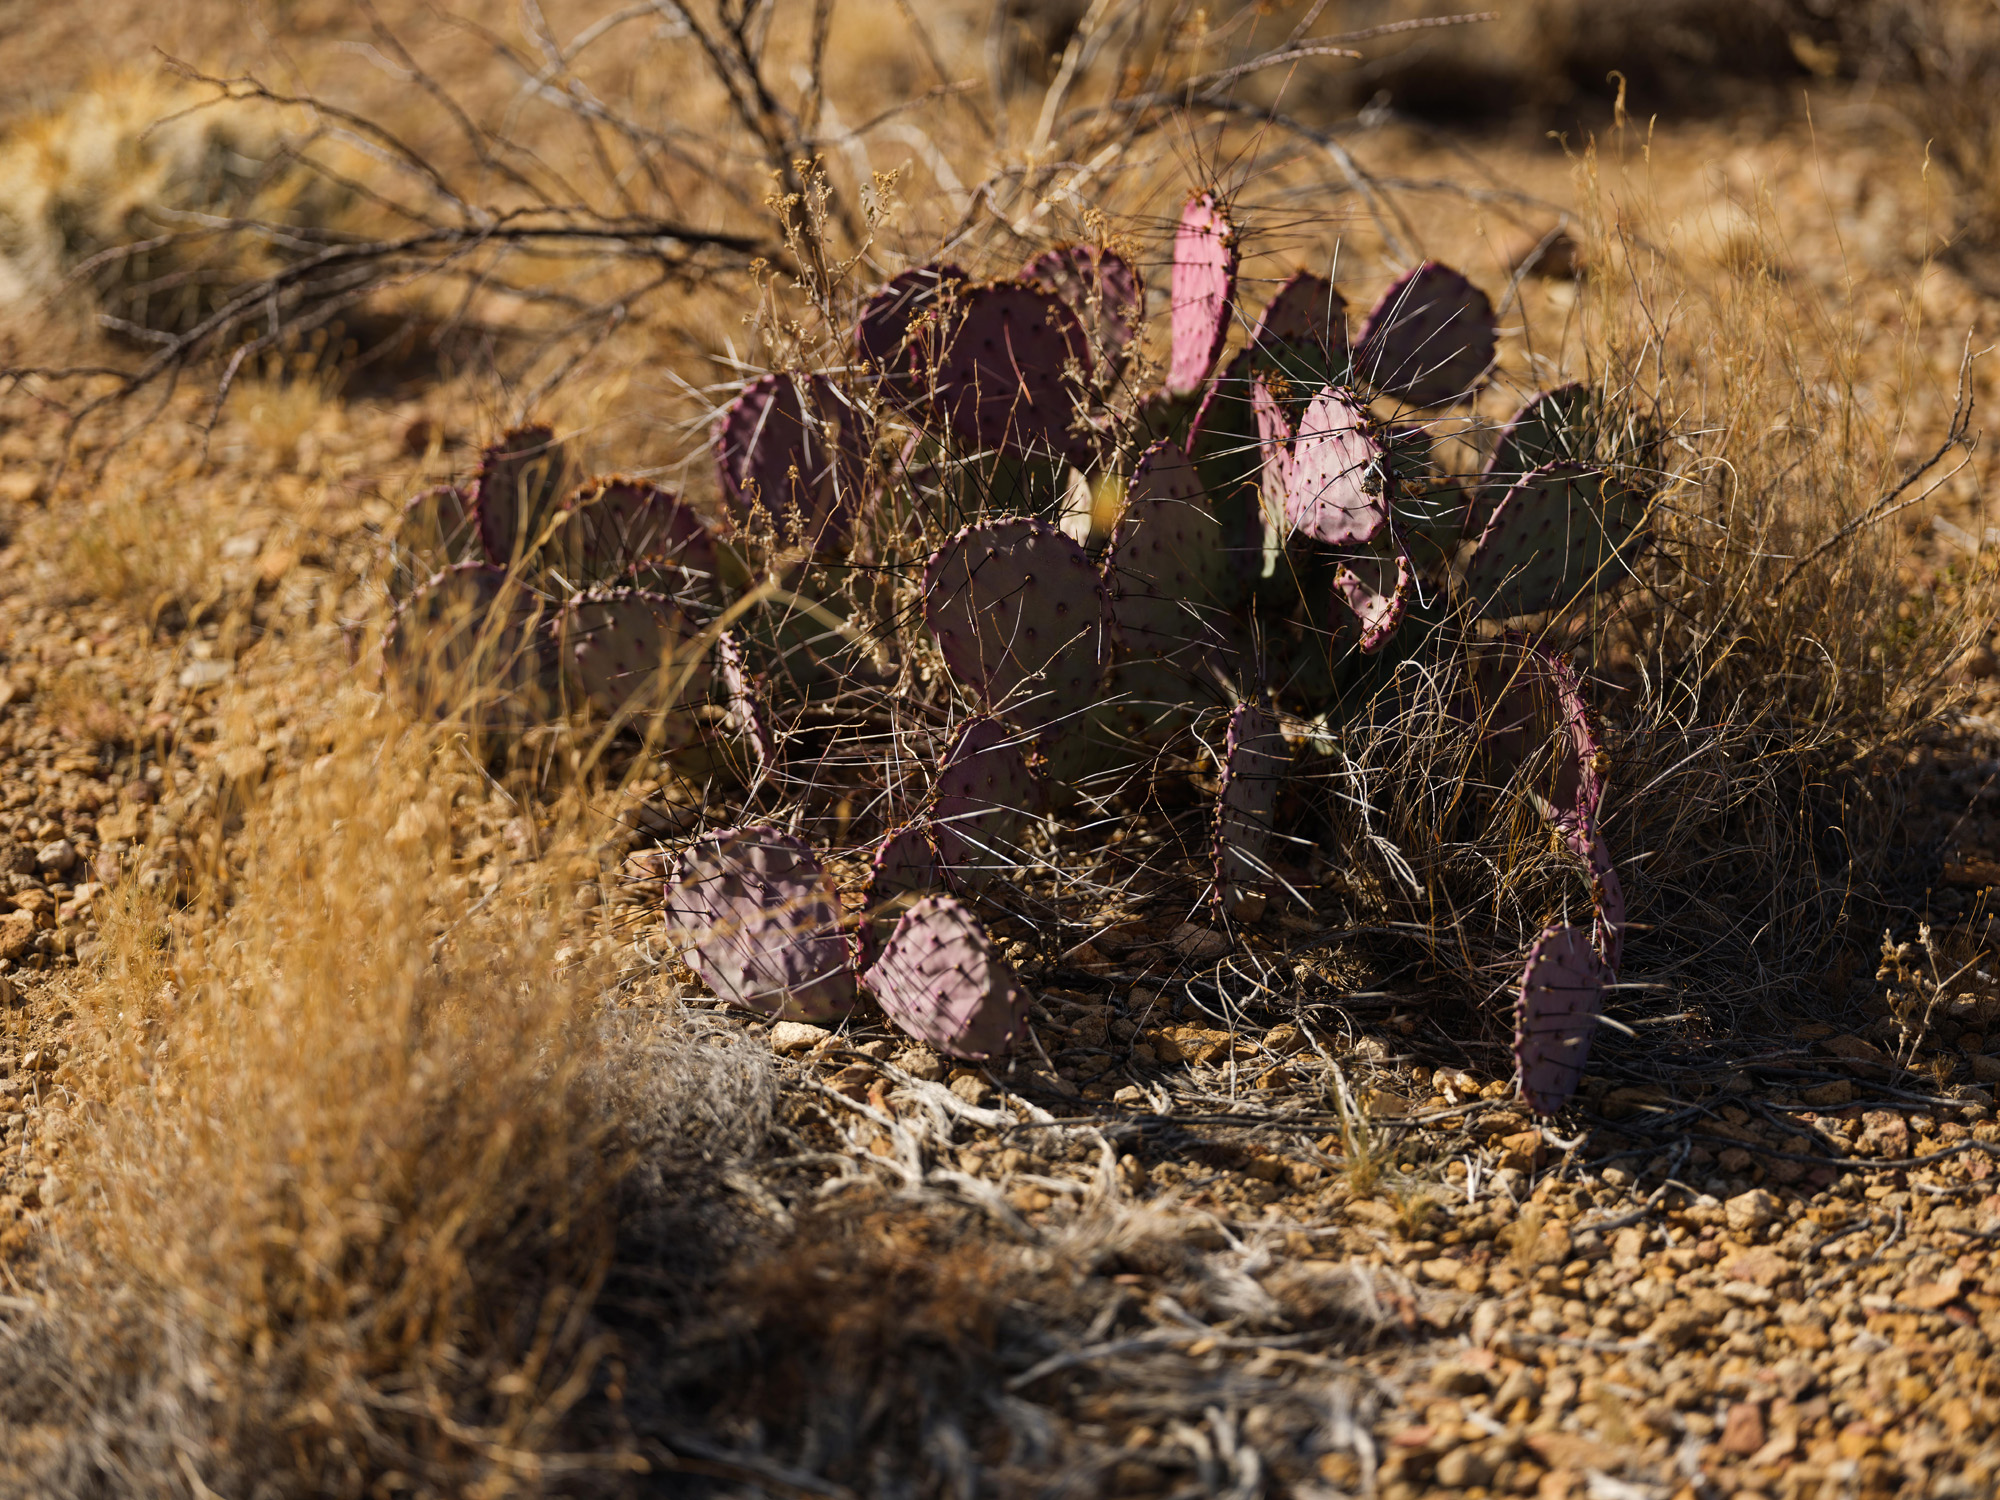 Purple cacti sprouts messily from a dusty sand space